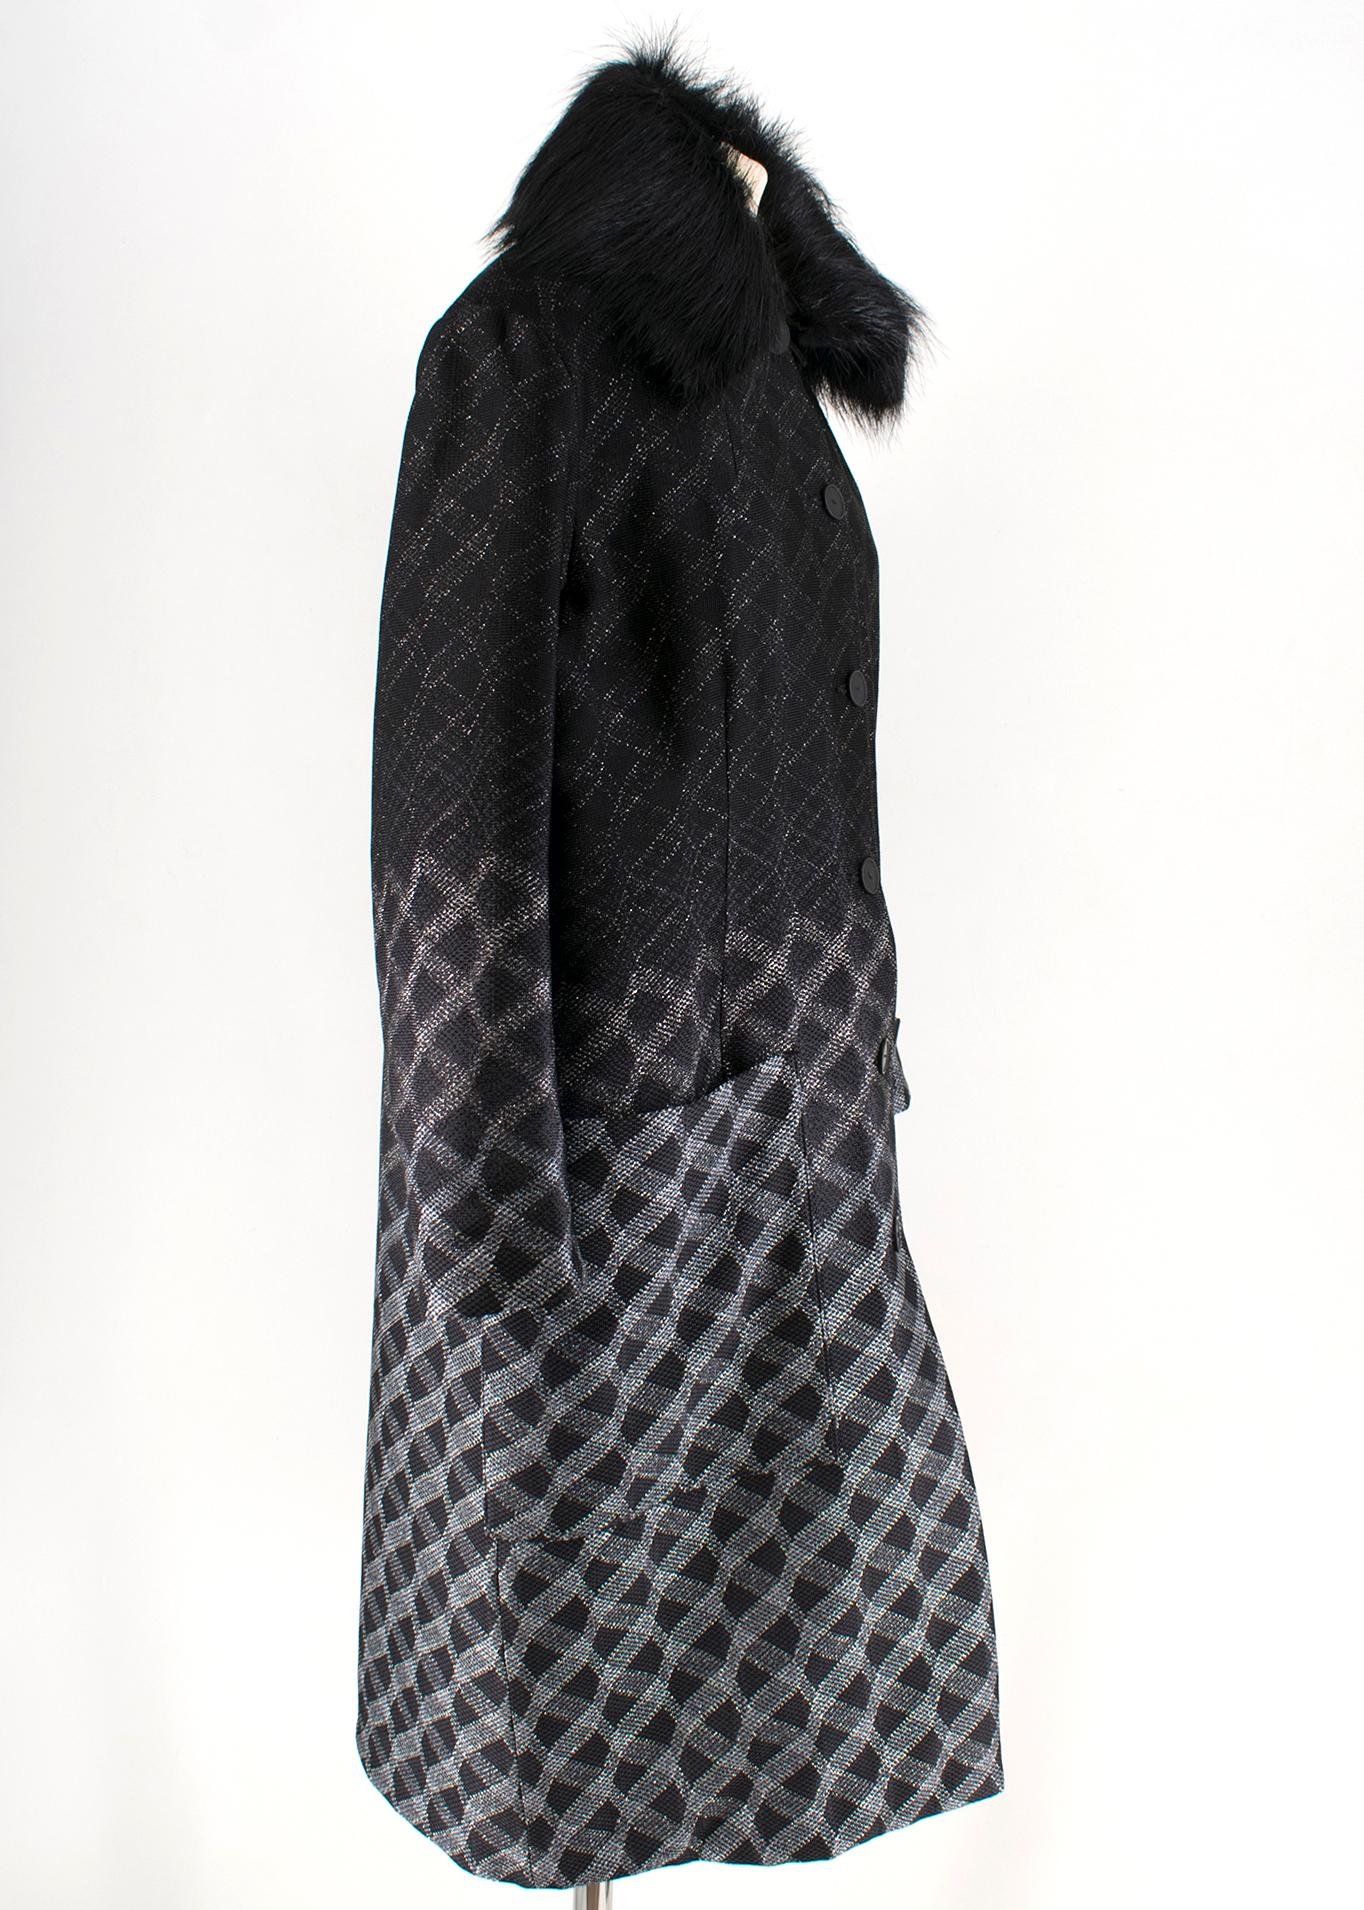 Missoni Reversible Black & Silver Knit Padded Coat 

- reversible black coat
- termo padding
- slip pockets
- button fastening to the font
- removable faux fur collar

Please note, these items are pre-owned and may show some signs of storage, even